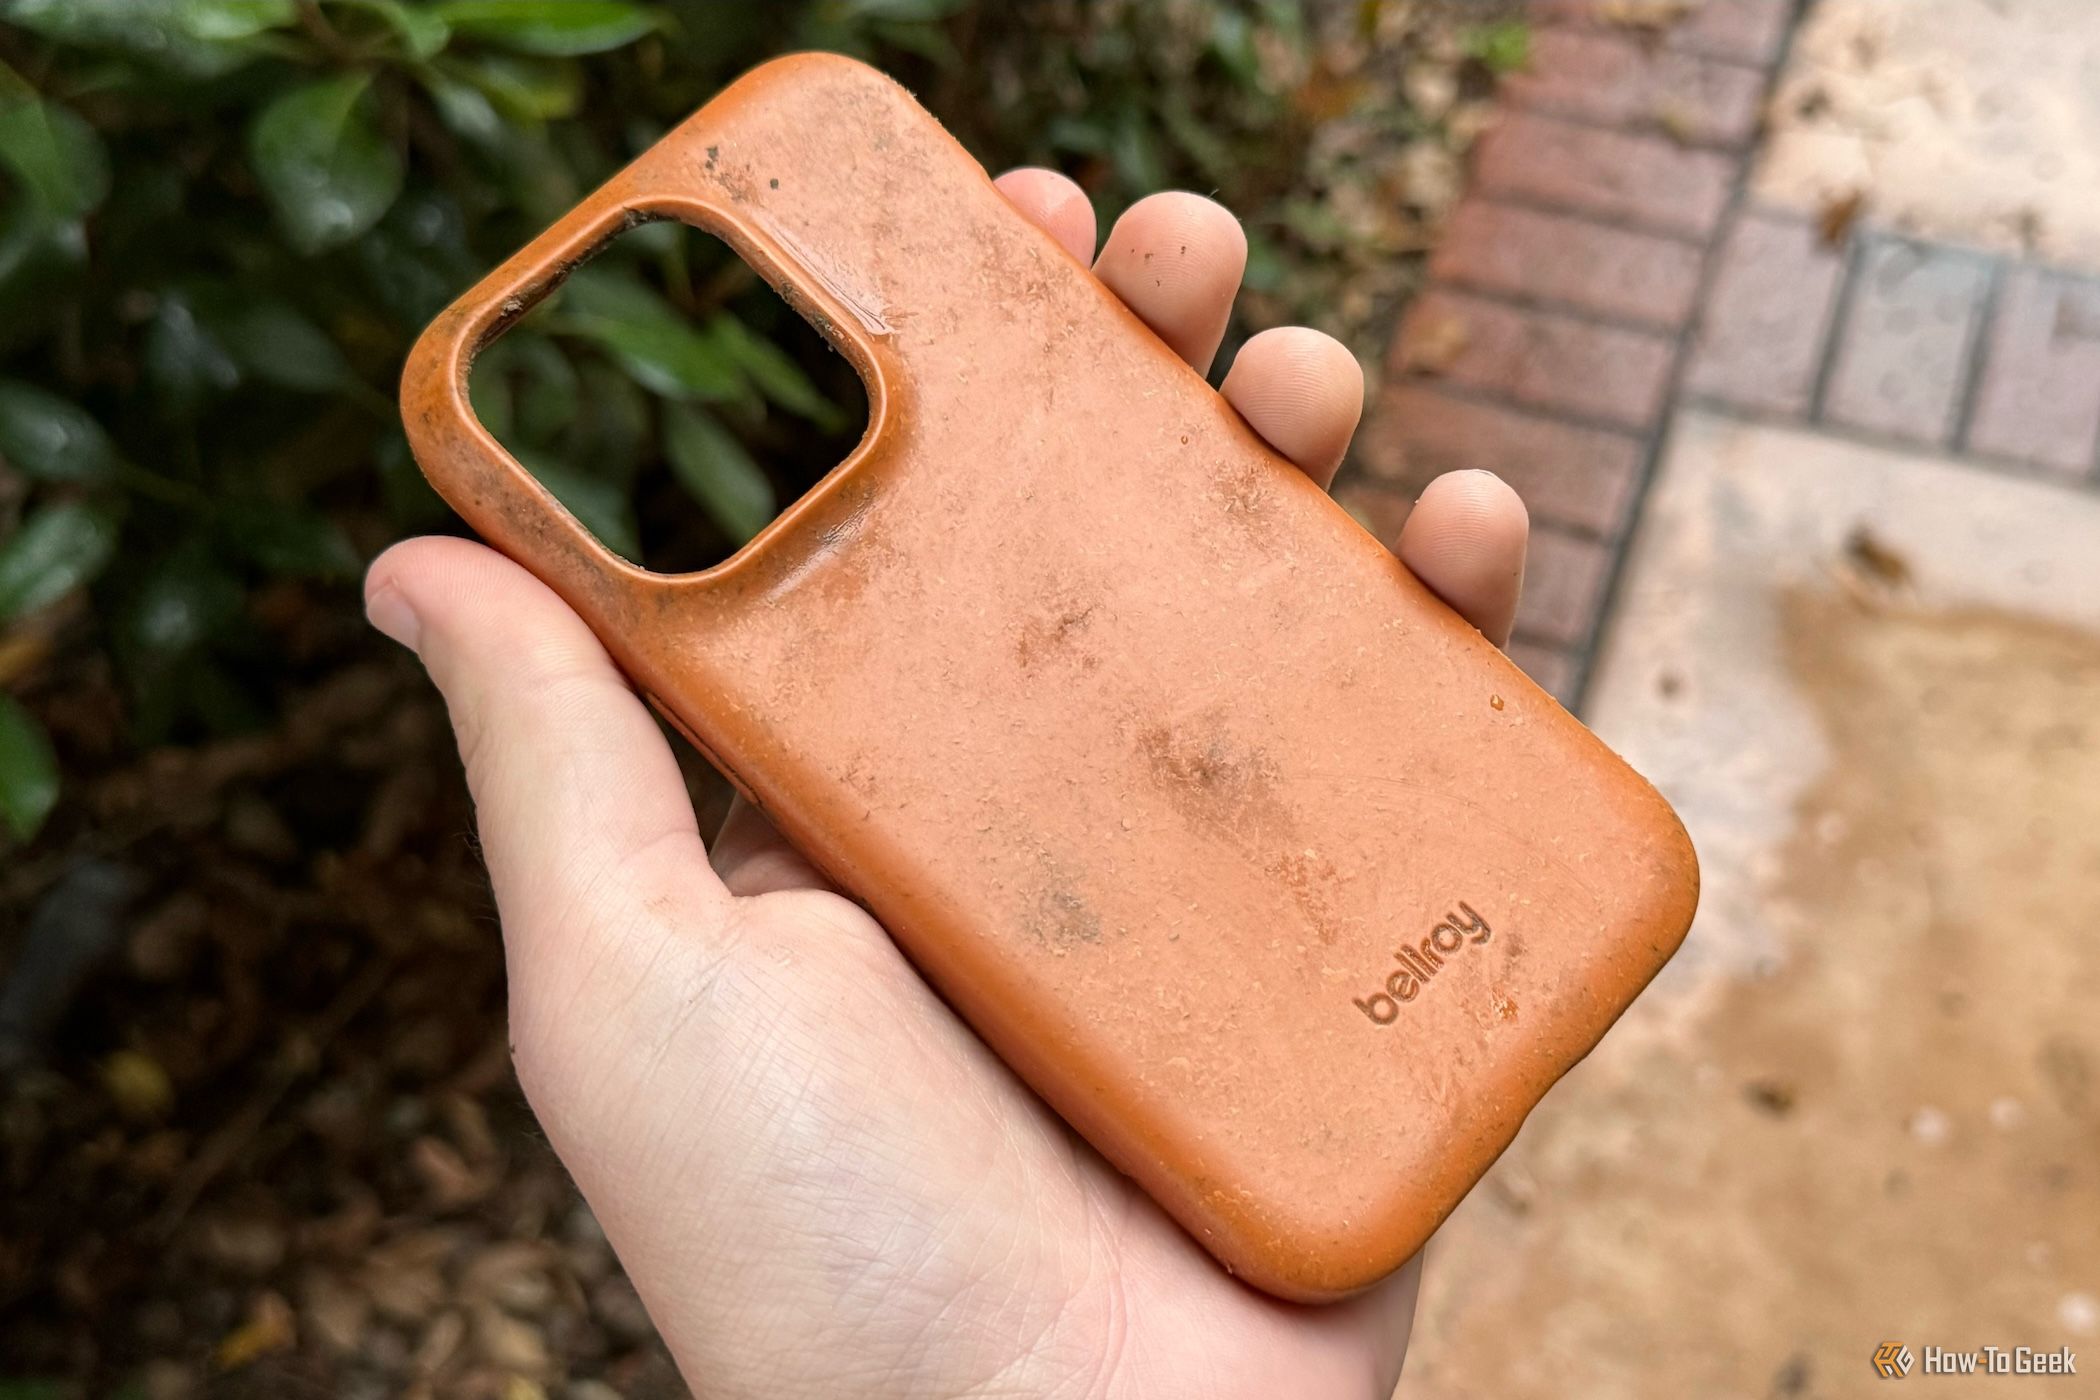 Bellroy Bio Phone Case being held by a human hand